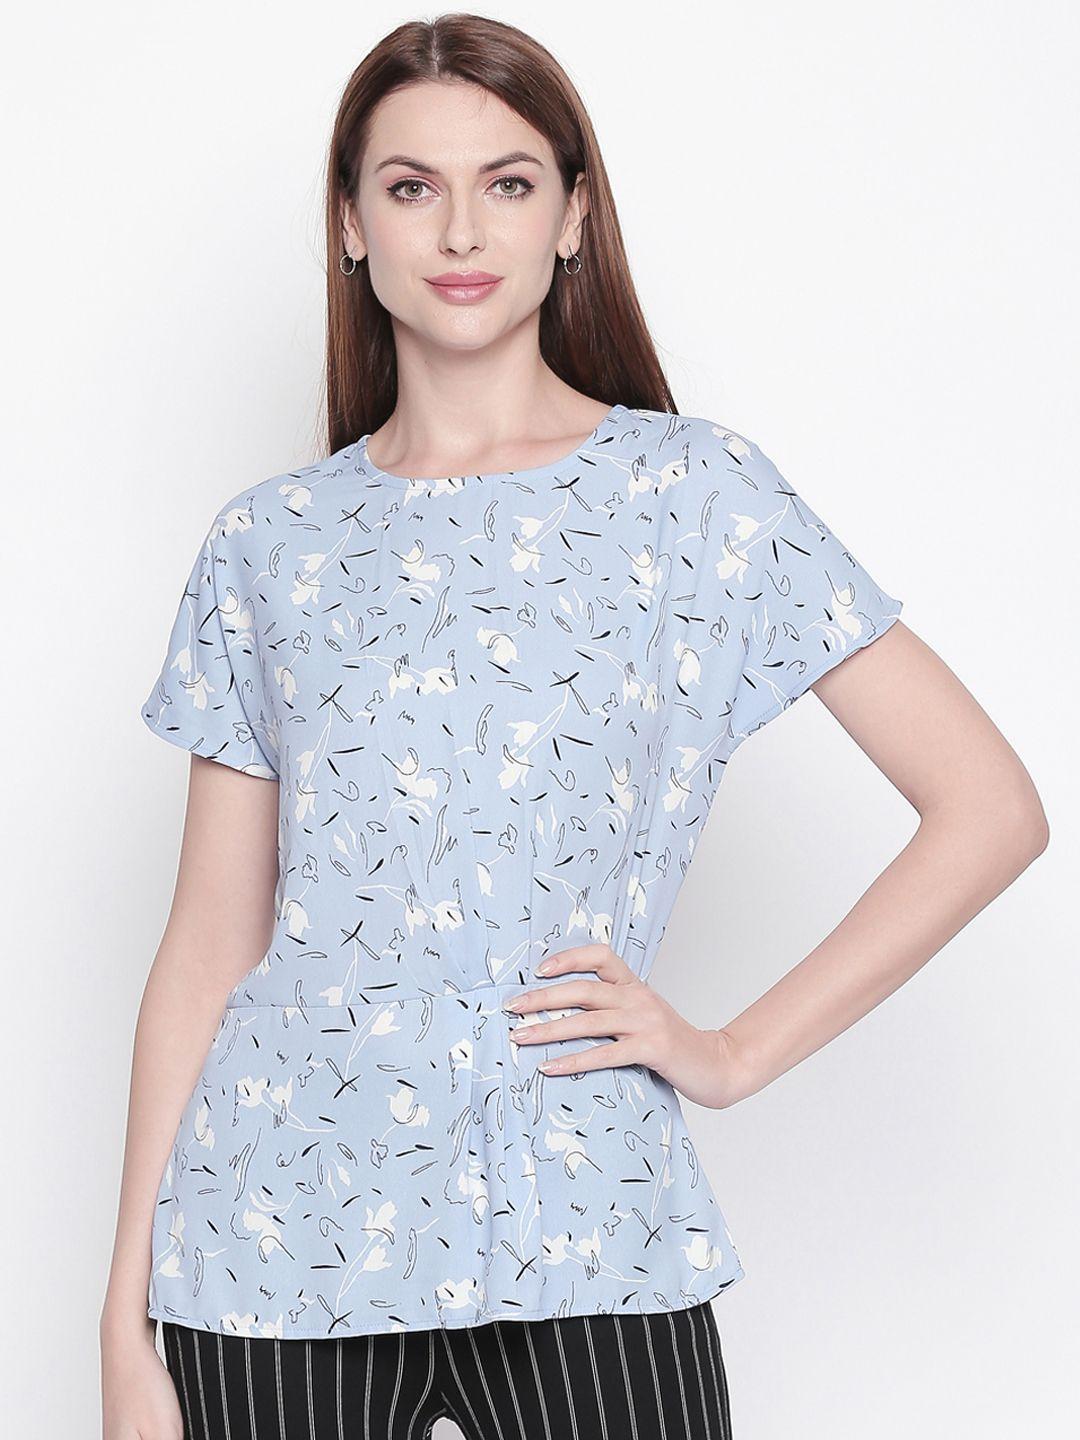 Annabelle by Pantaloons Women Blue & White Floral Printed Top